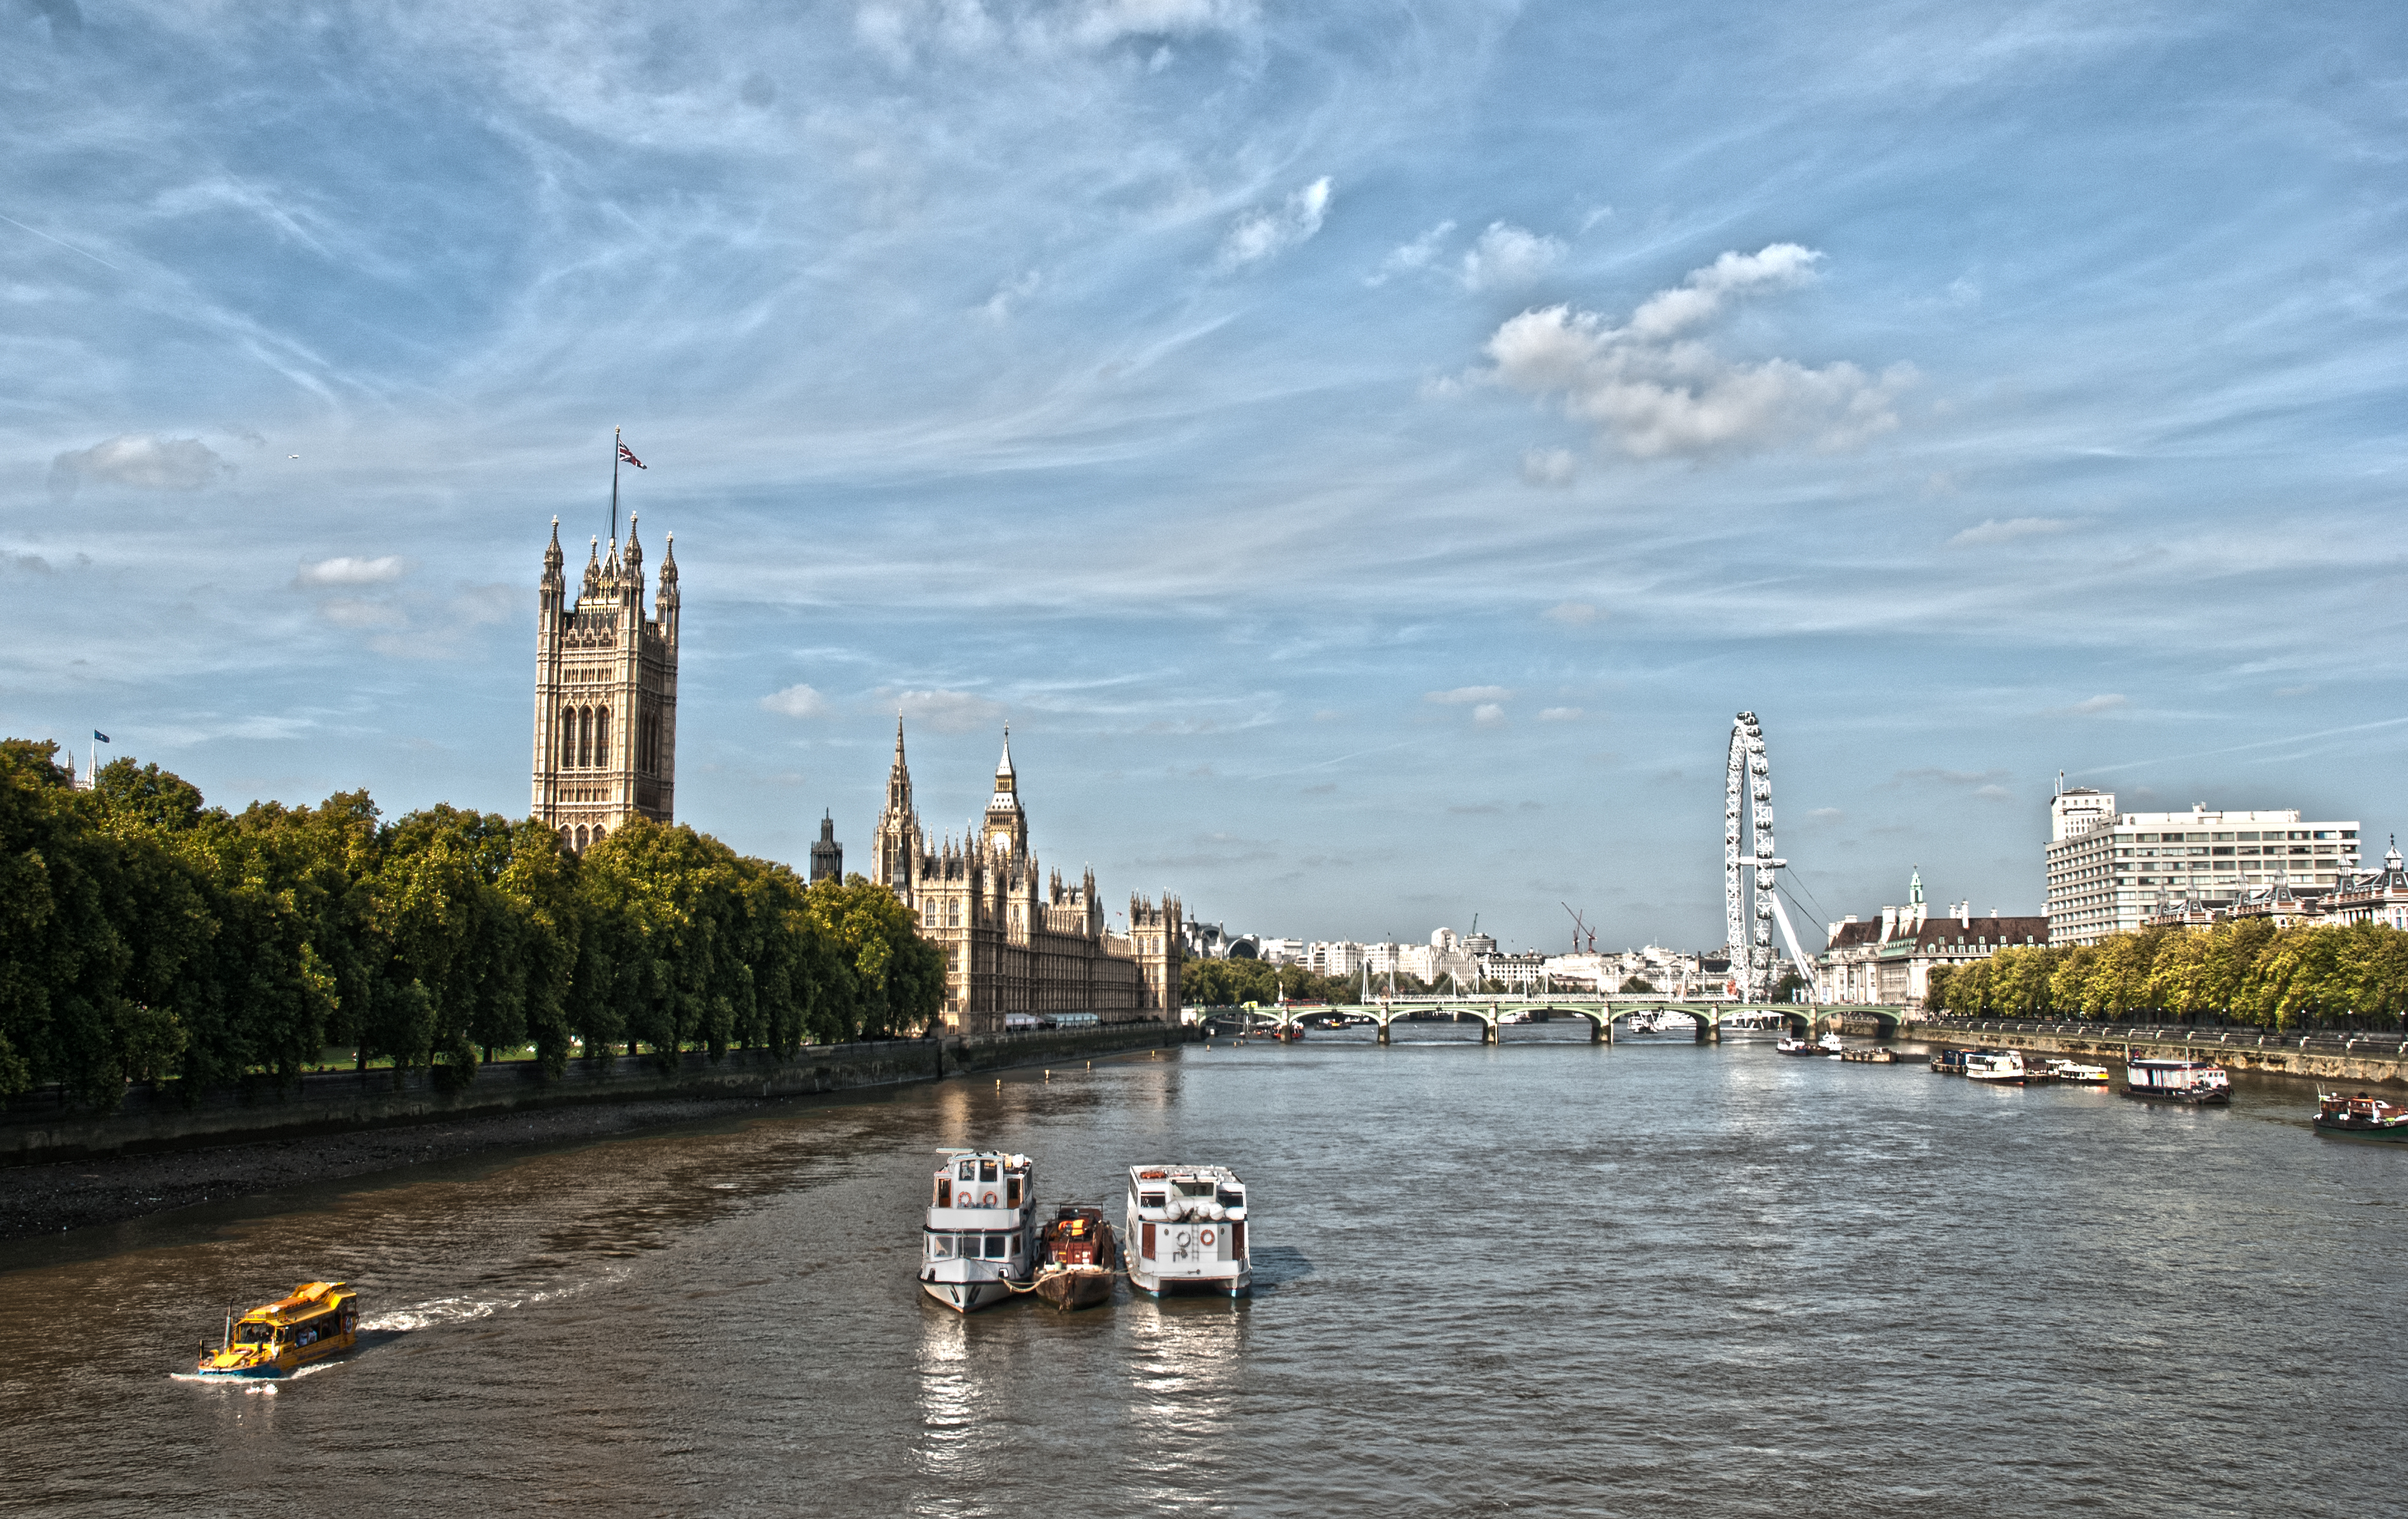 File:A Thames view, London (7657487524).jpg - Wikimedia Commons